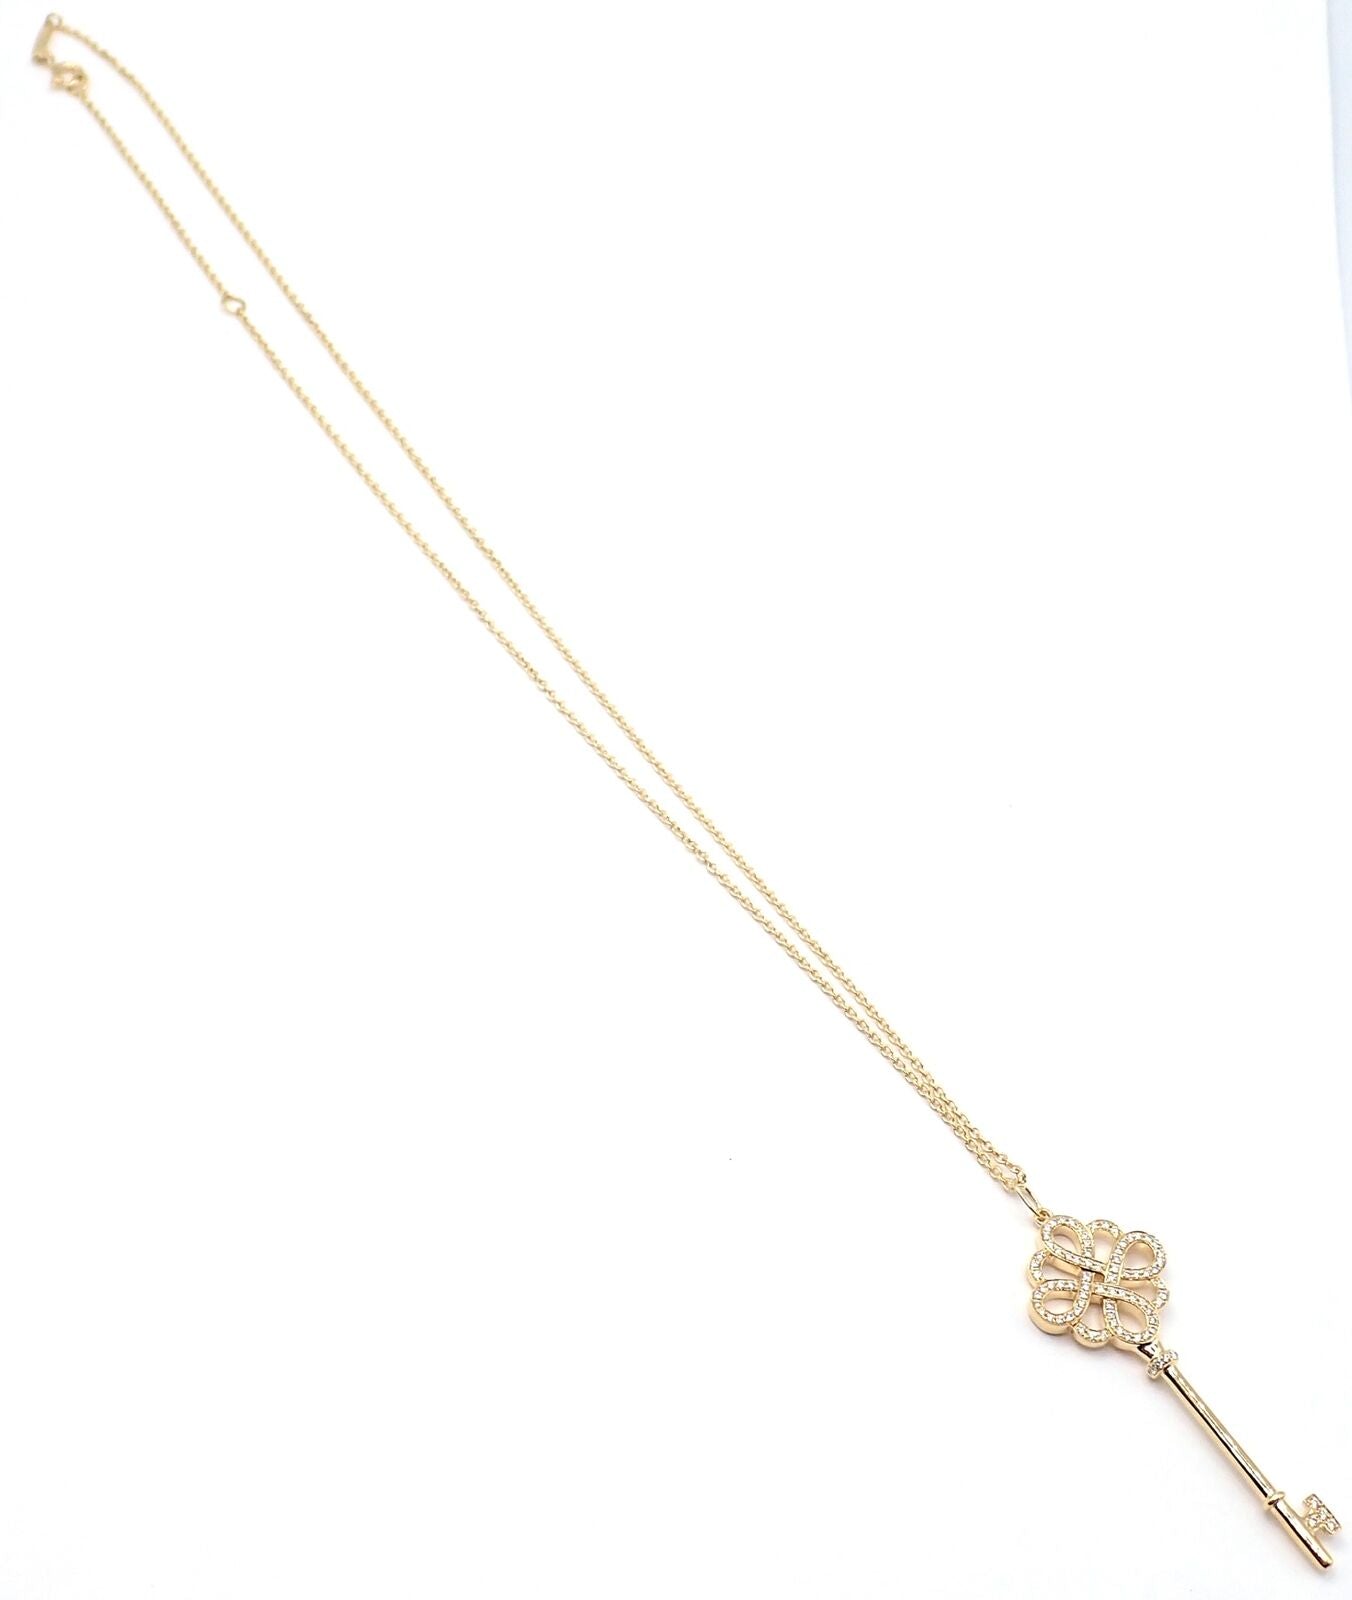 Tiffany & Co. Jewelry & Watches:Fine Jewelry:Necklaces & Pendants Authentic! Tiffany & Co 18k Rose Gold Knot Diamond Key Pendant Necklace